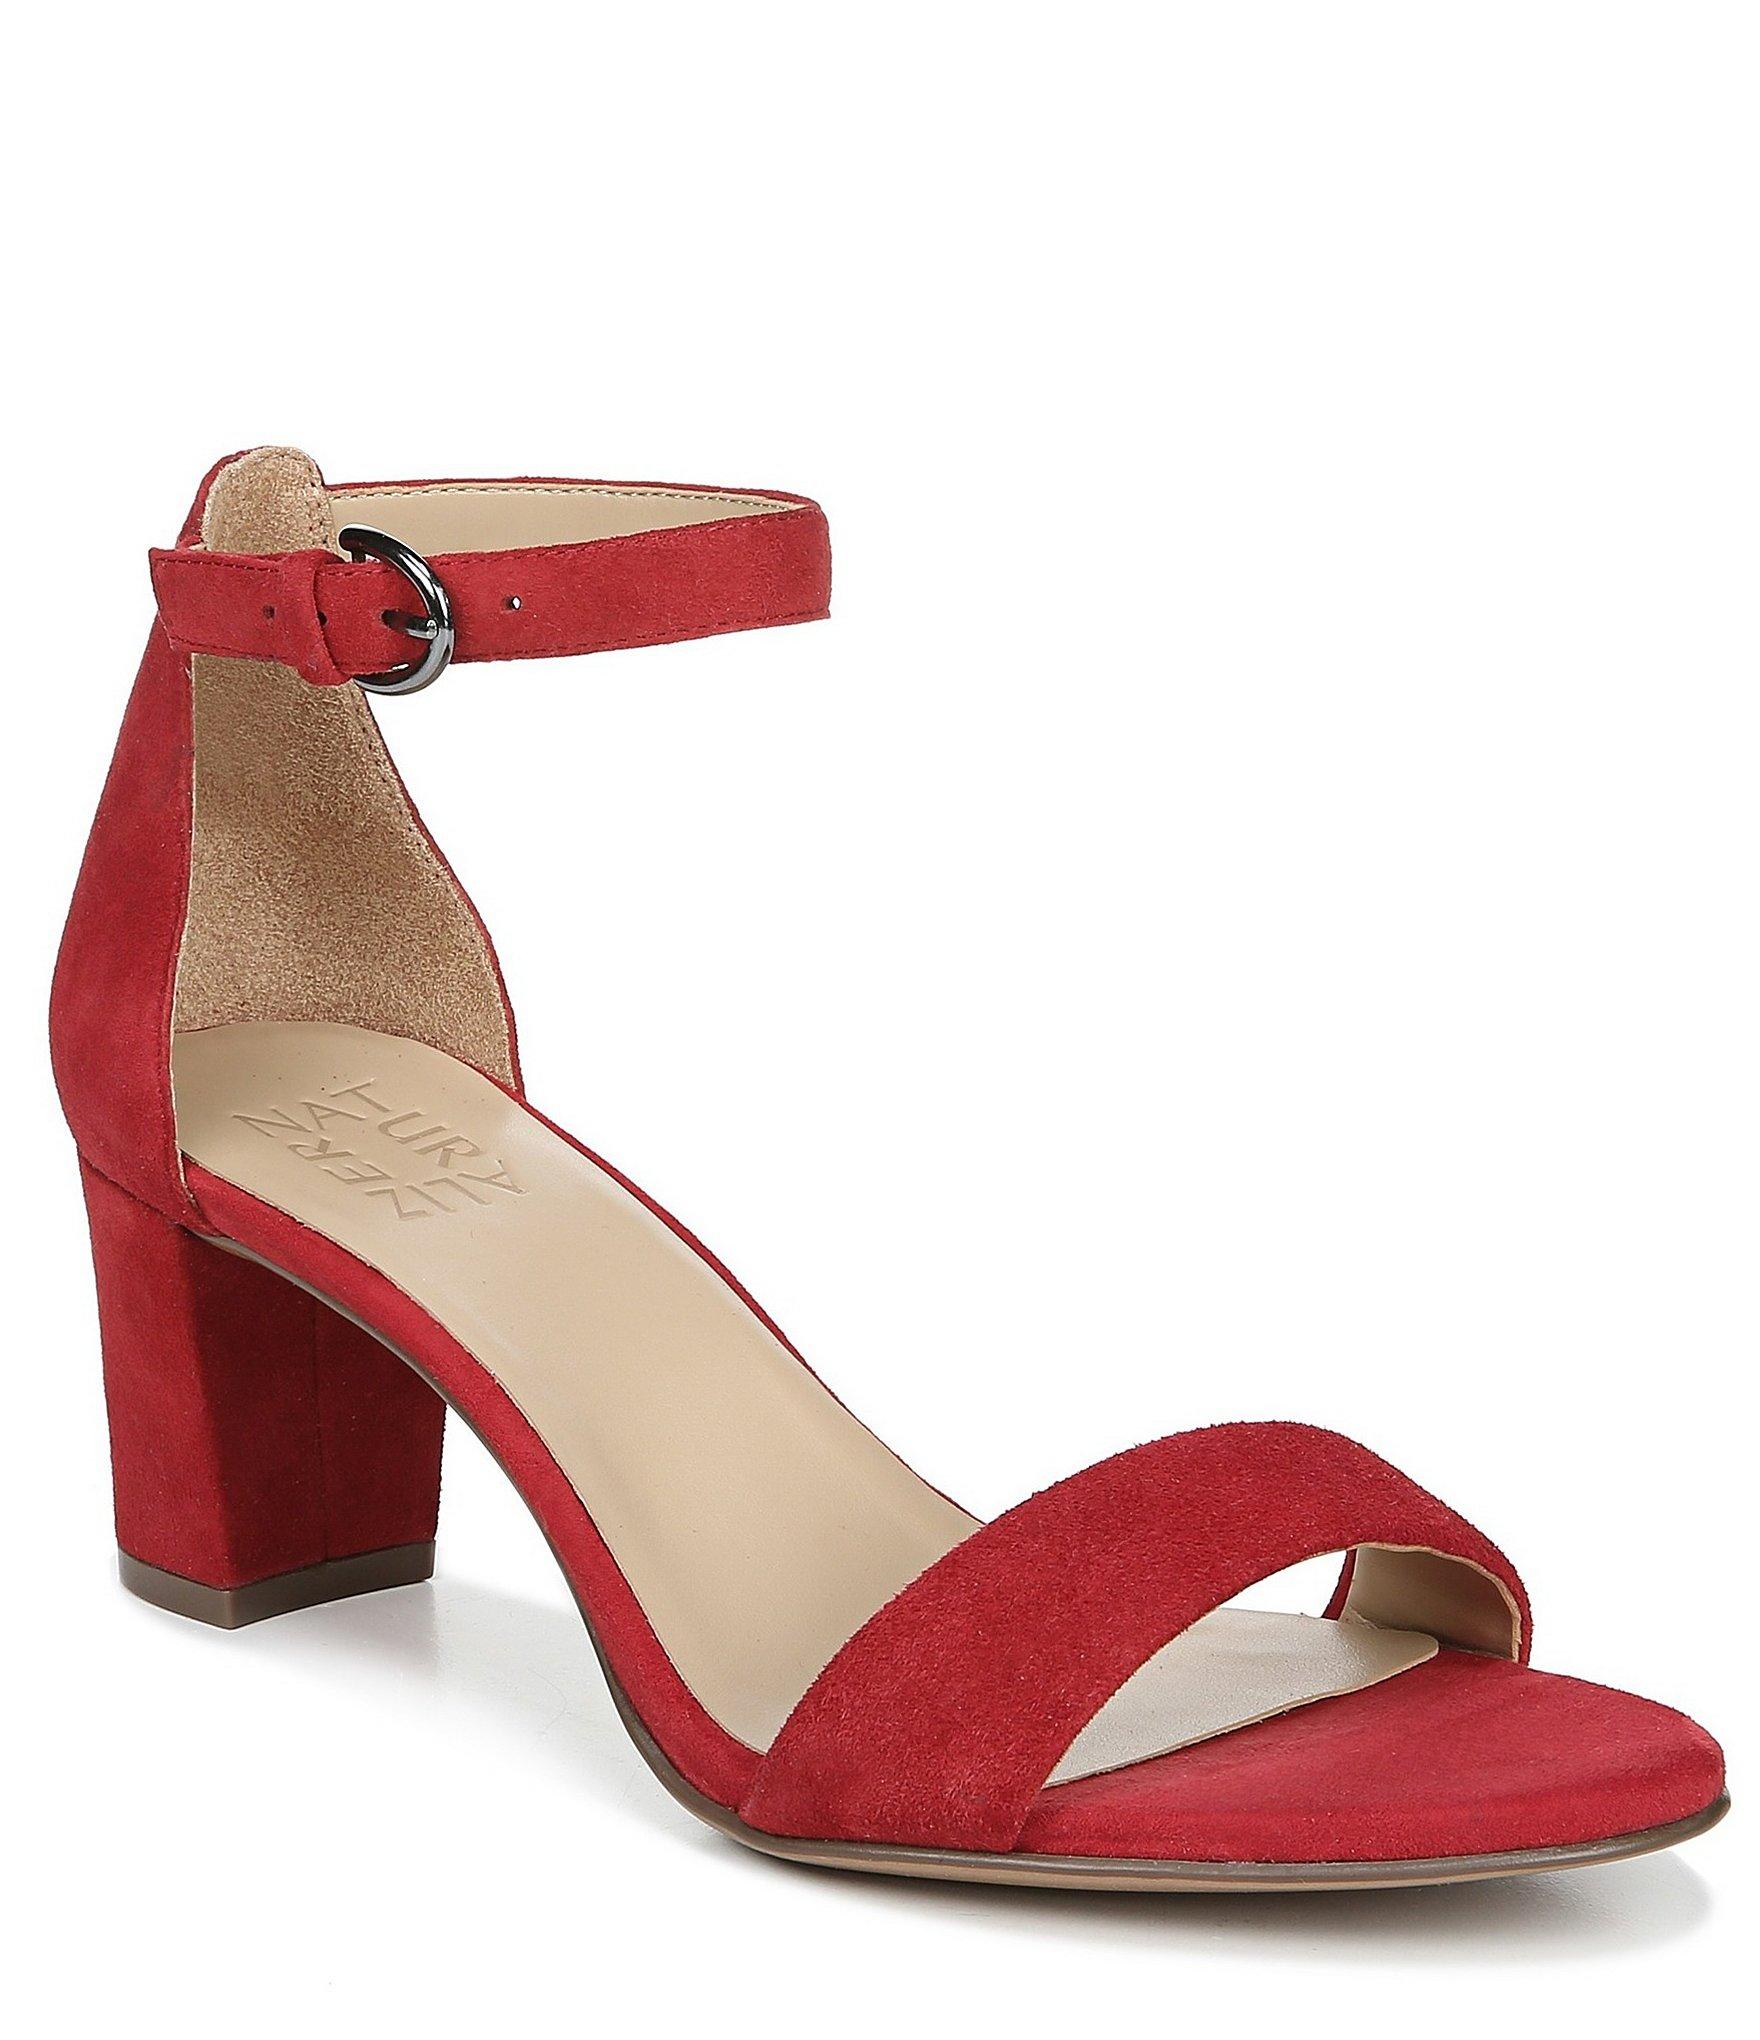 Naturalizer Suede Vera Ankle Strap Dress Sandals in Red - Save 24% - Lyst